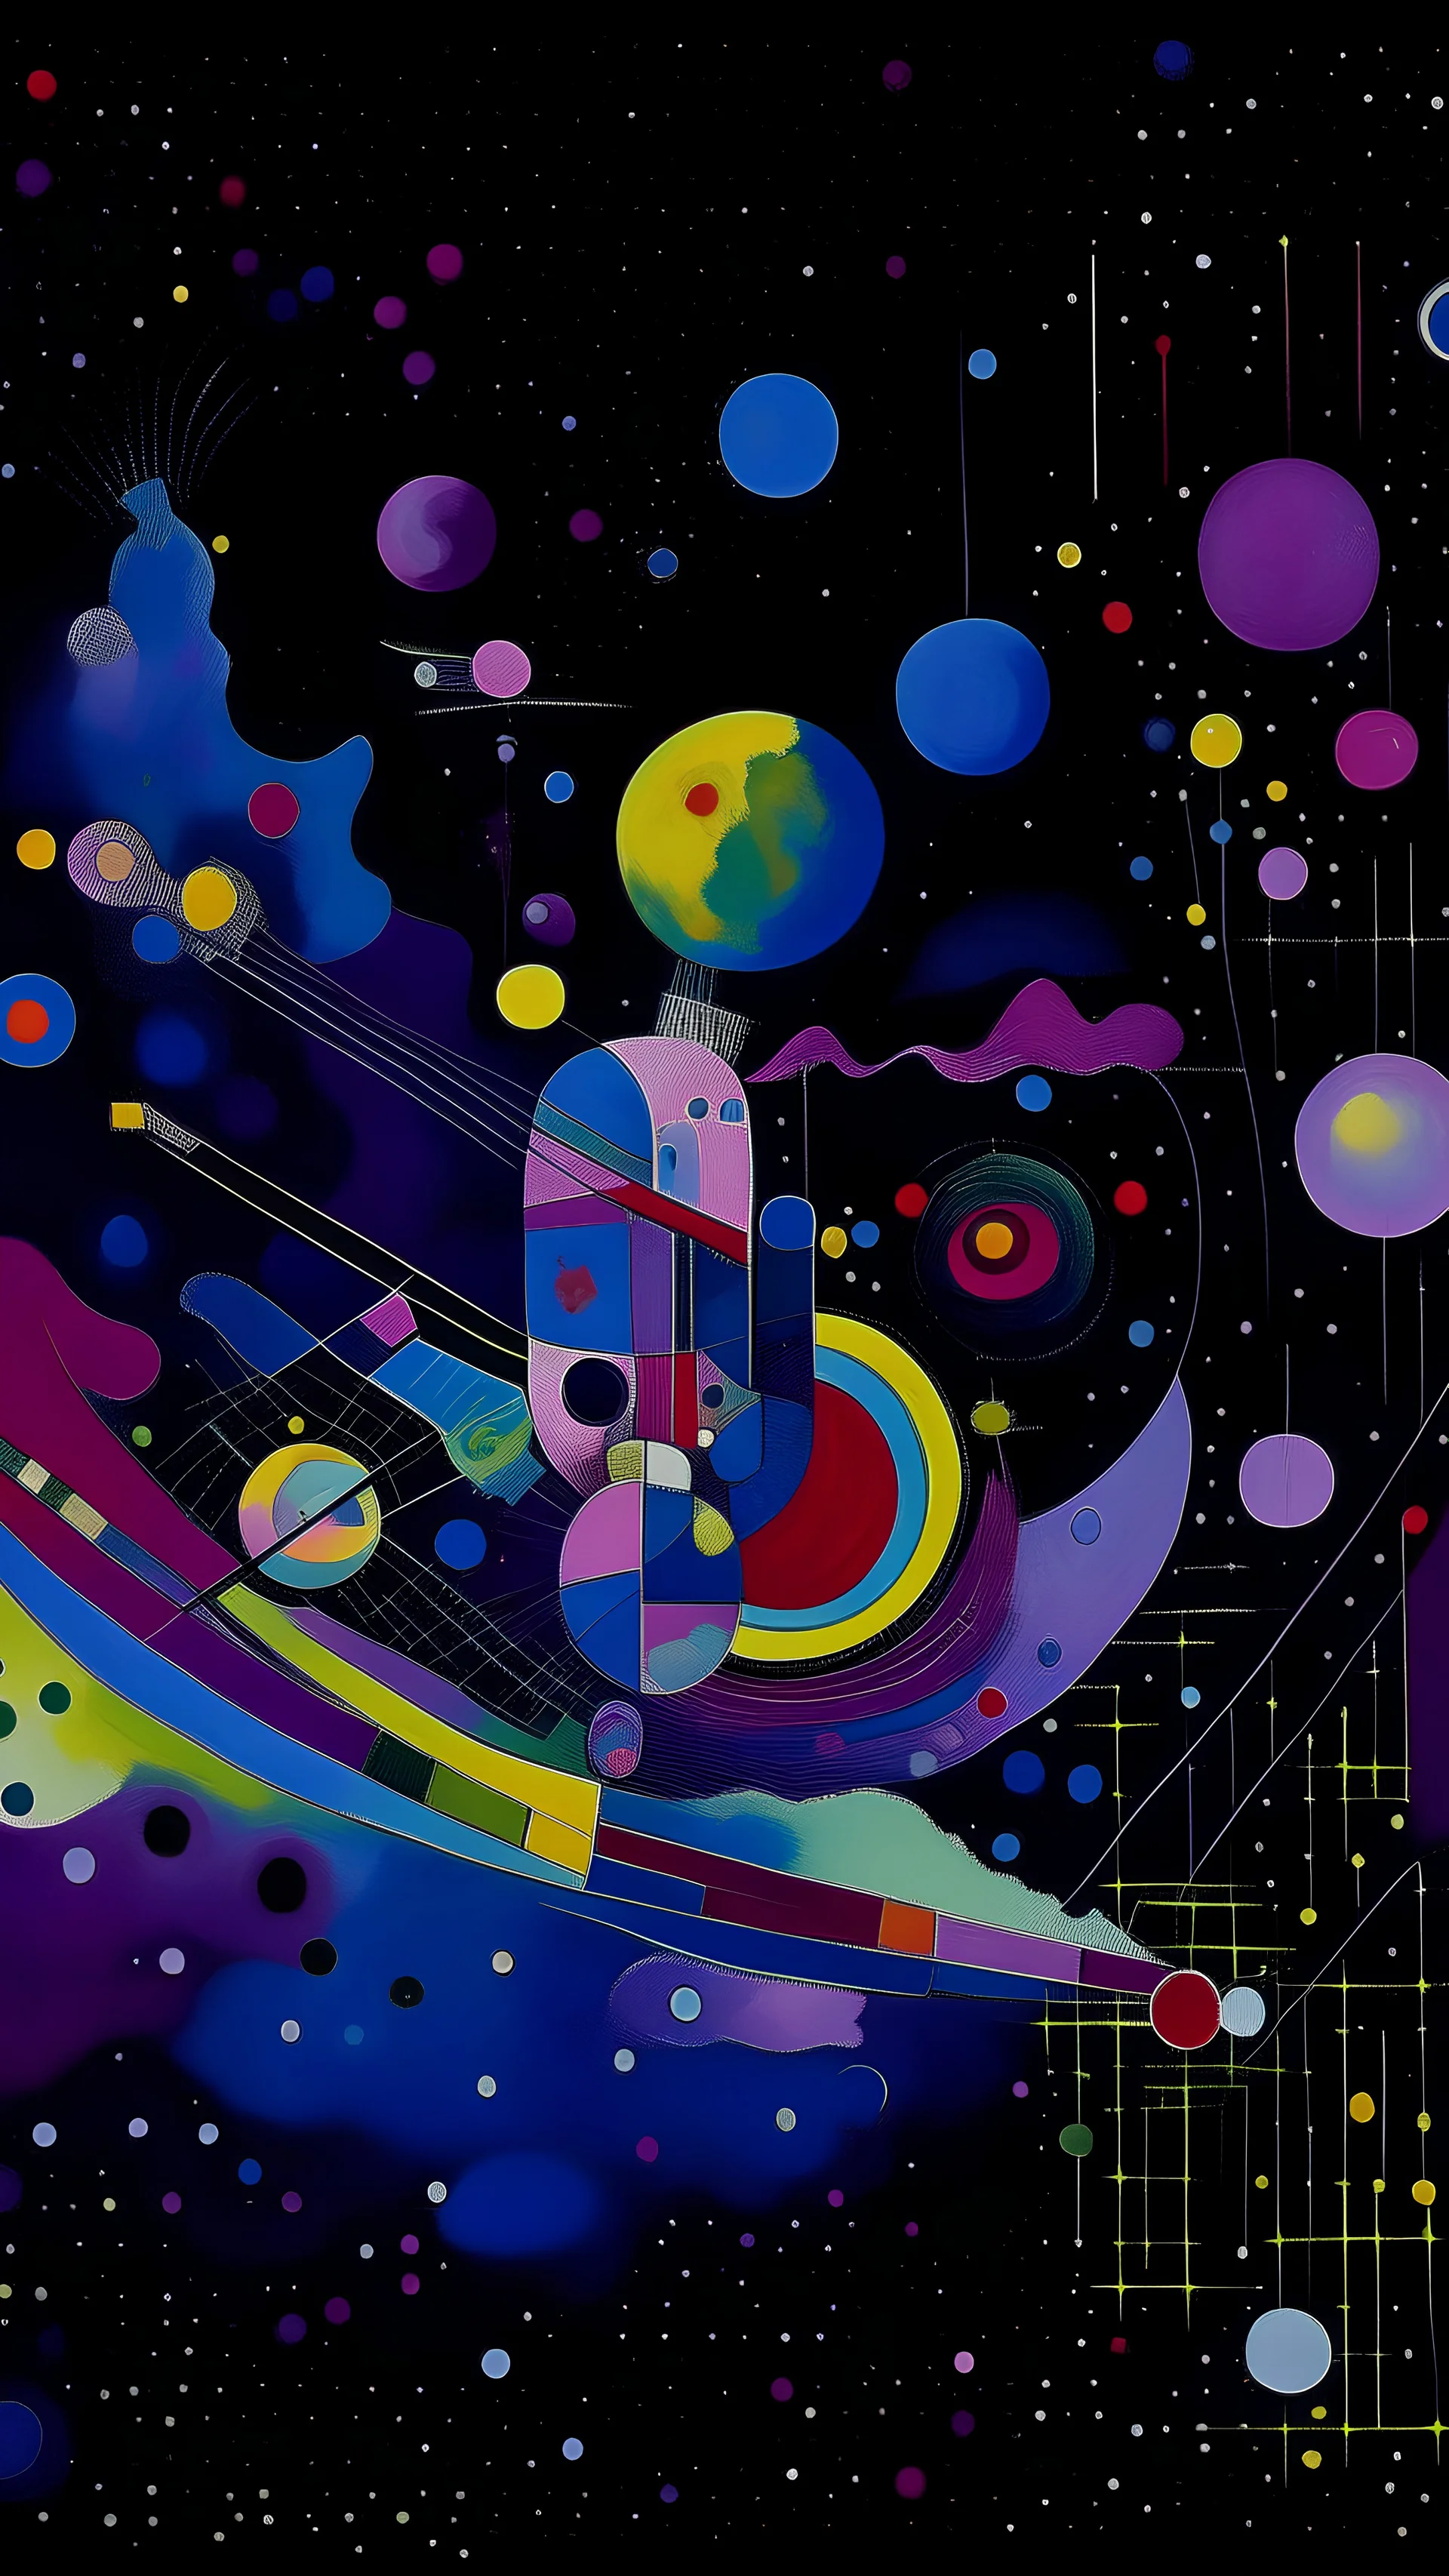 A violet space station surrounded by planets painted by Wassily Kandinsky